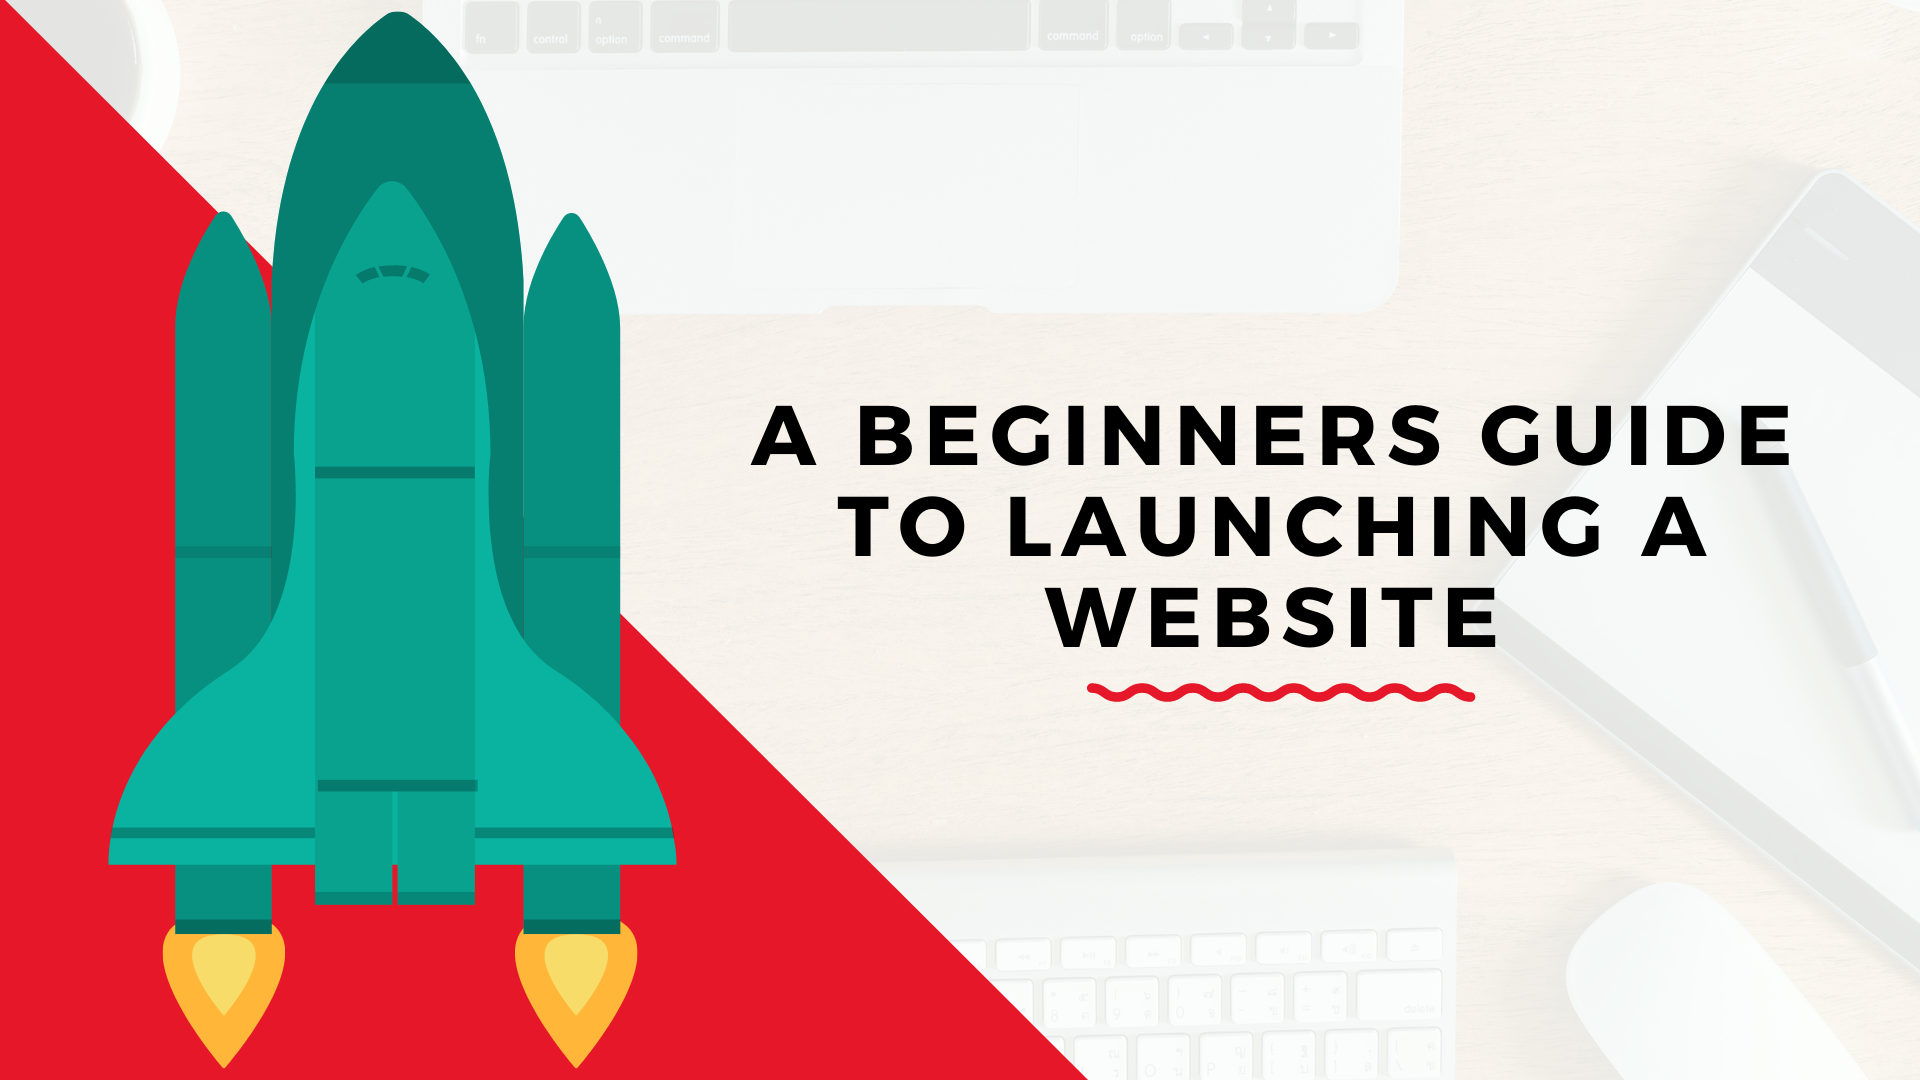 A Beginner’s Guide to Launching a Website